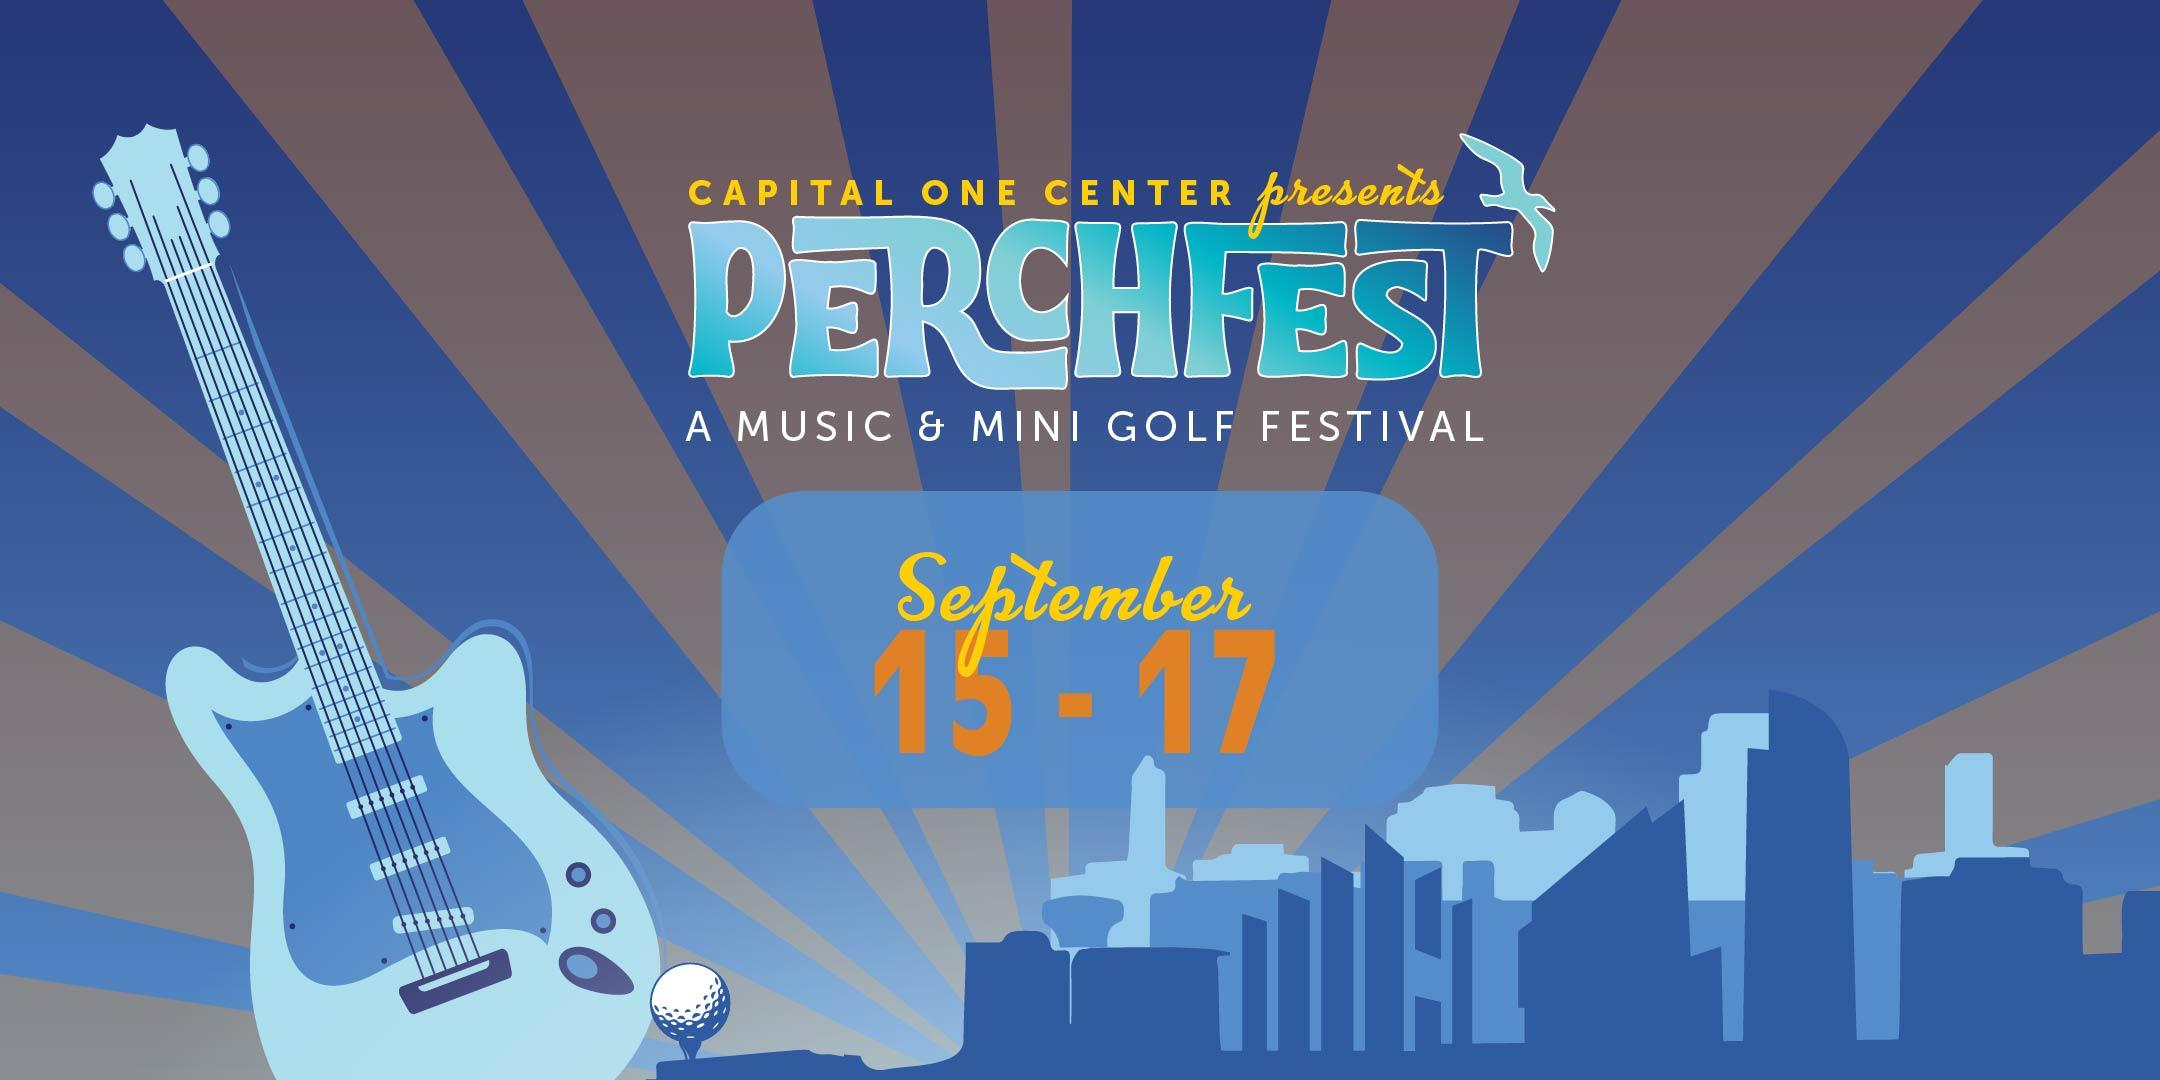 Capital One Center Presents Perchfest -- Saturday, September 16th